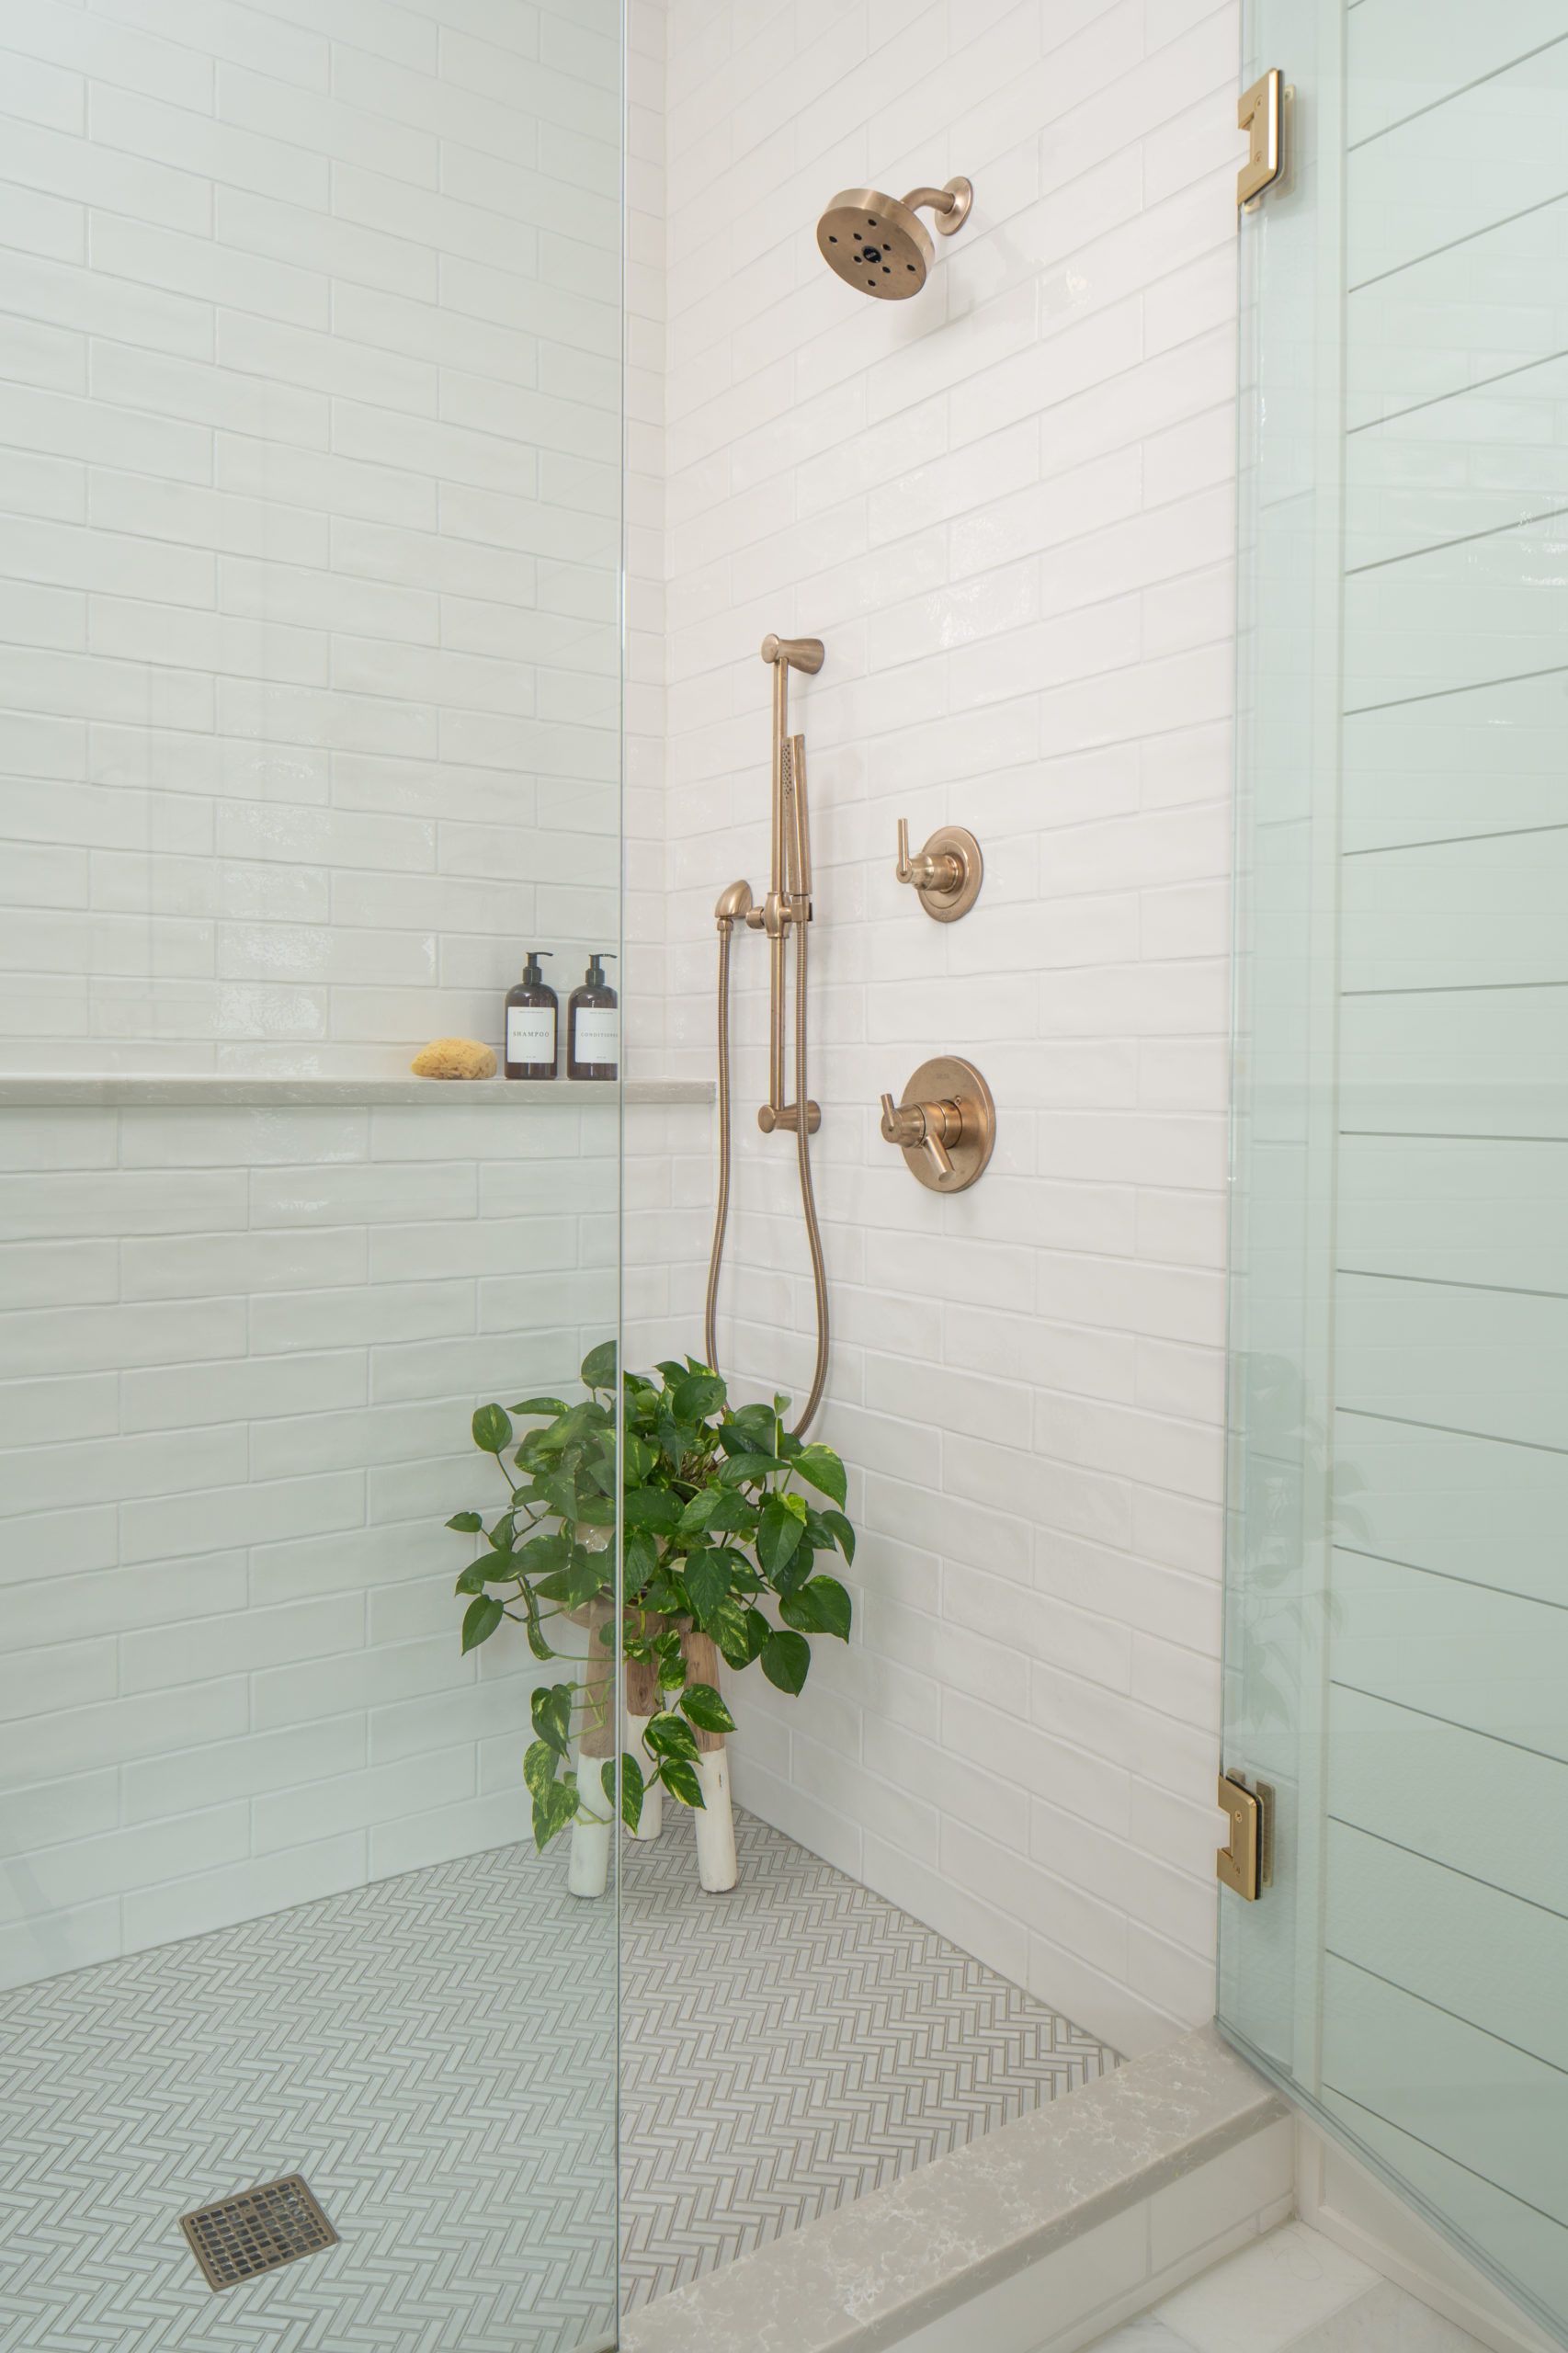 A bathroom with a glass shower stall and a plant.